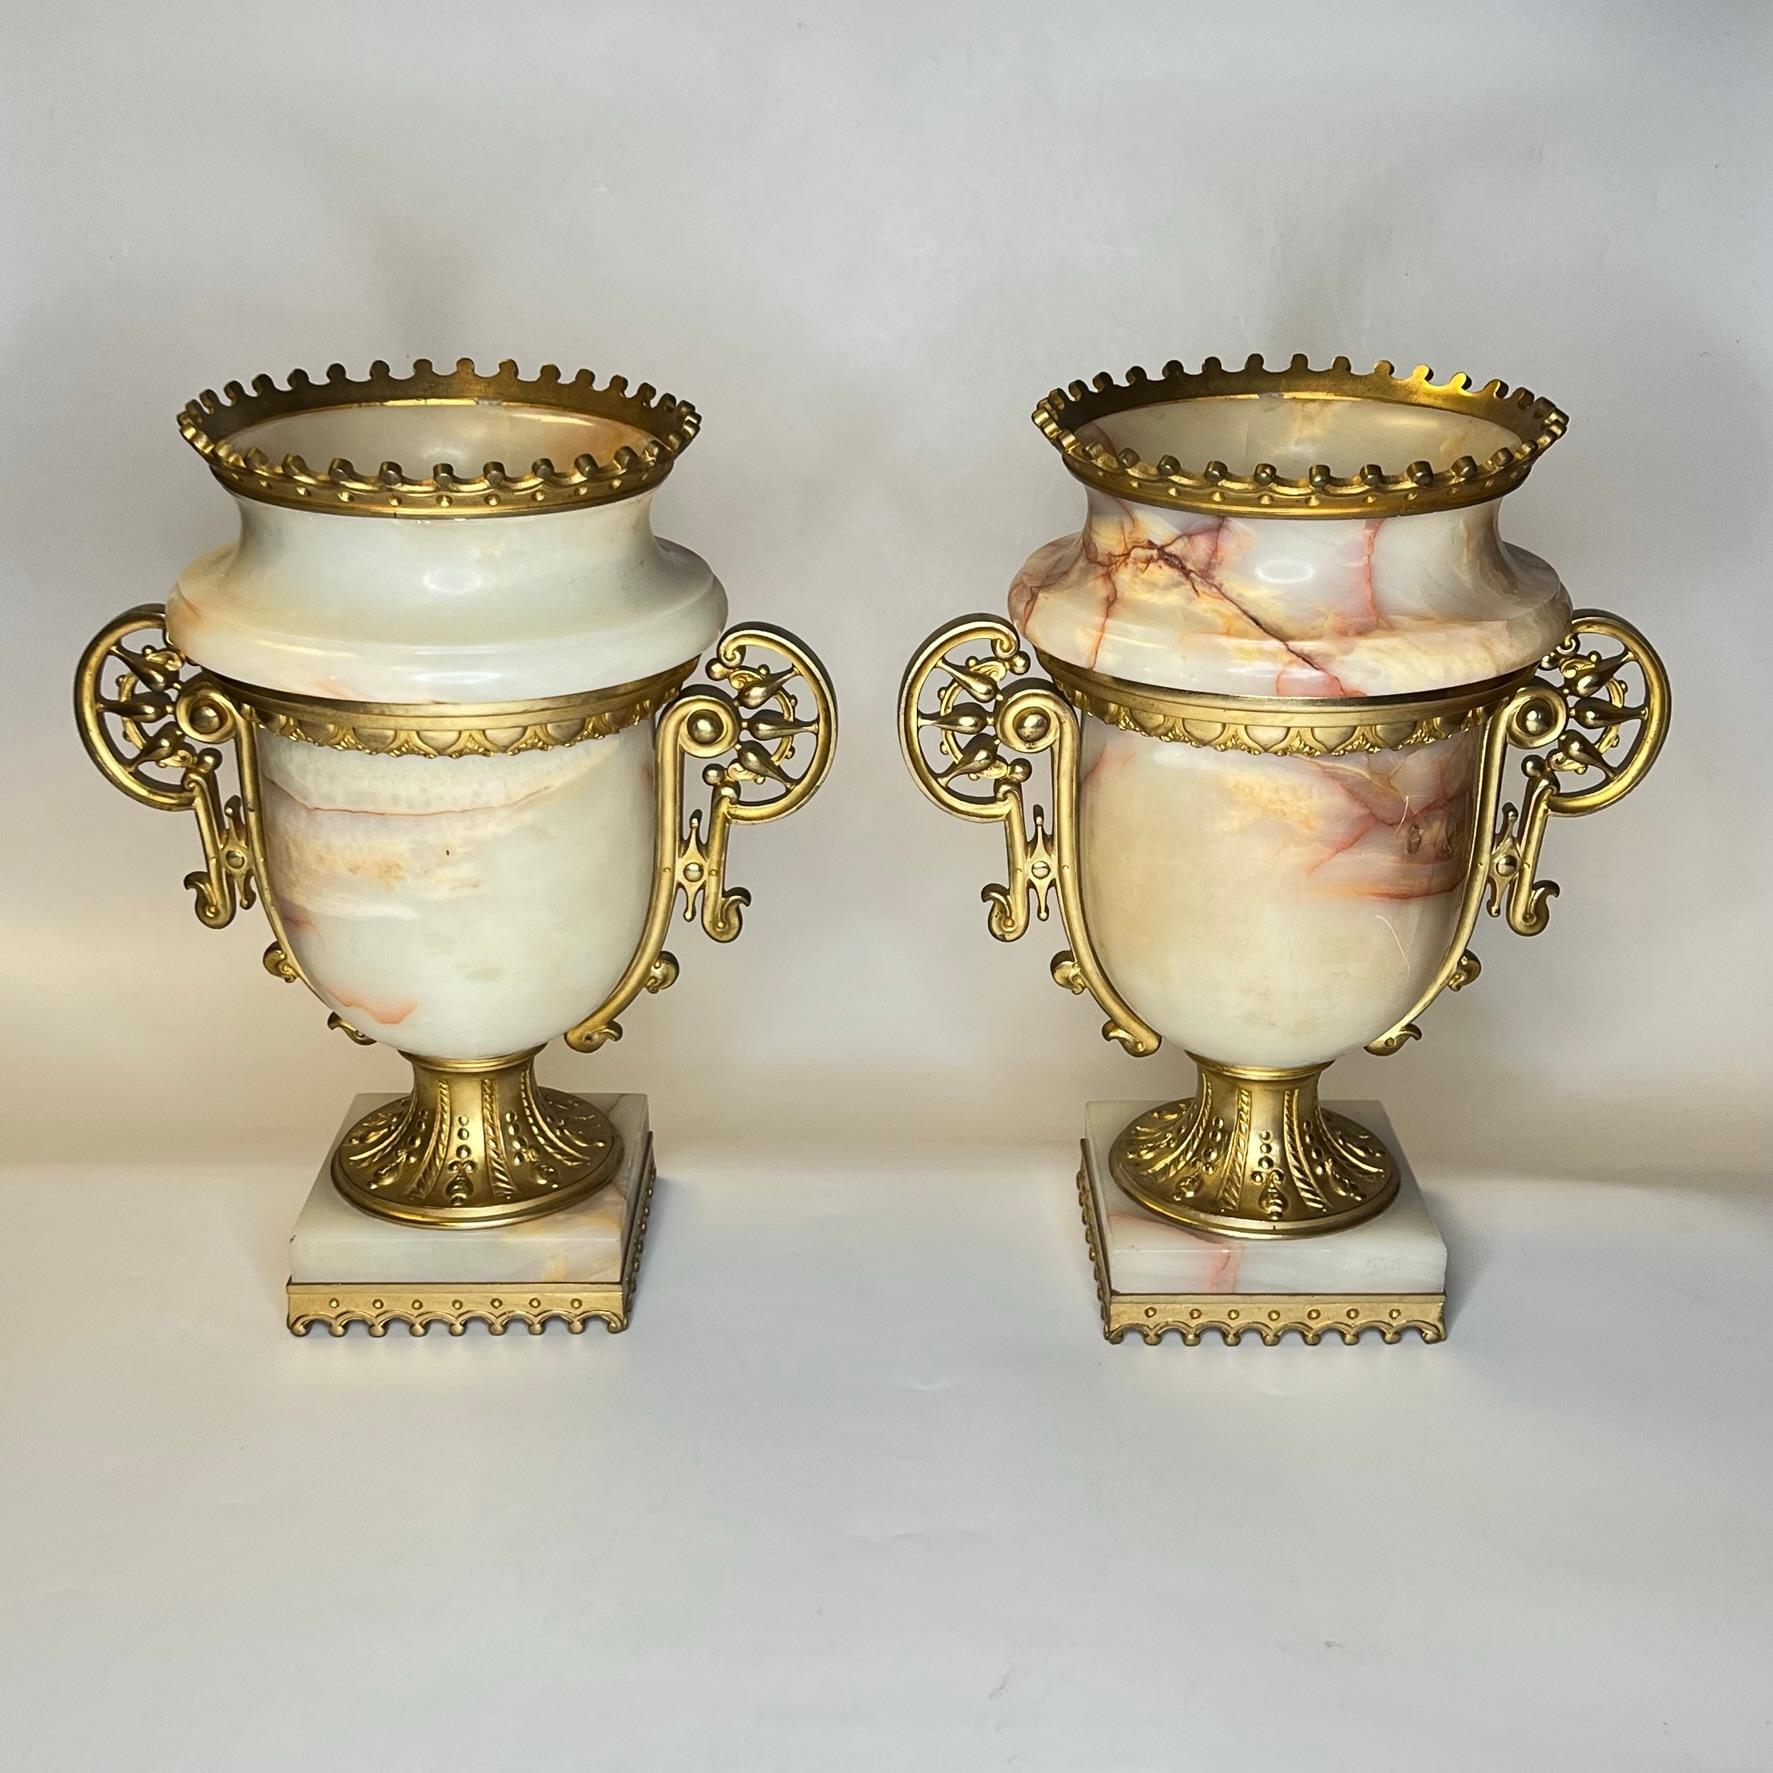 Pair of 19th century continental gilt bronze mounted onyx stone vases in the renaissance style.   Each in good condition, with some hairline cracks to the onyx and rubbing wear to the gilt surfaces.